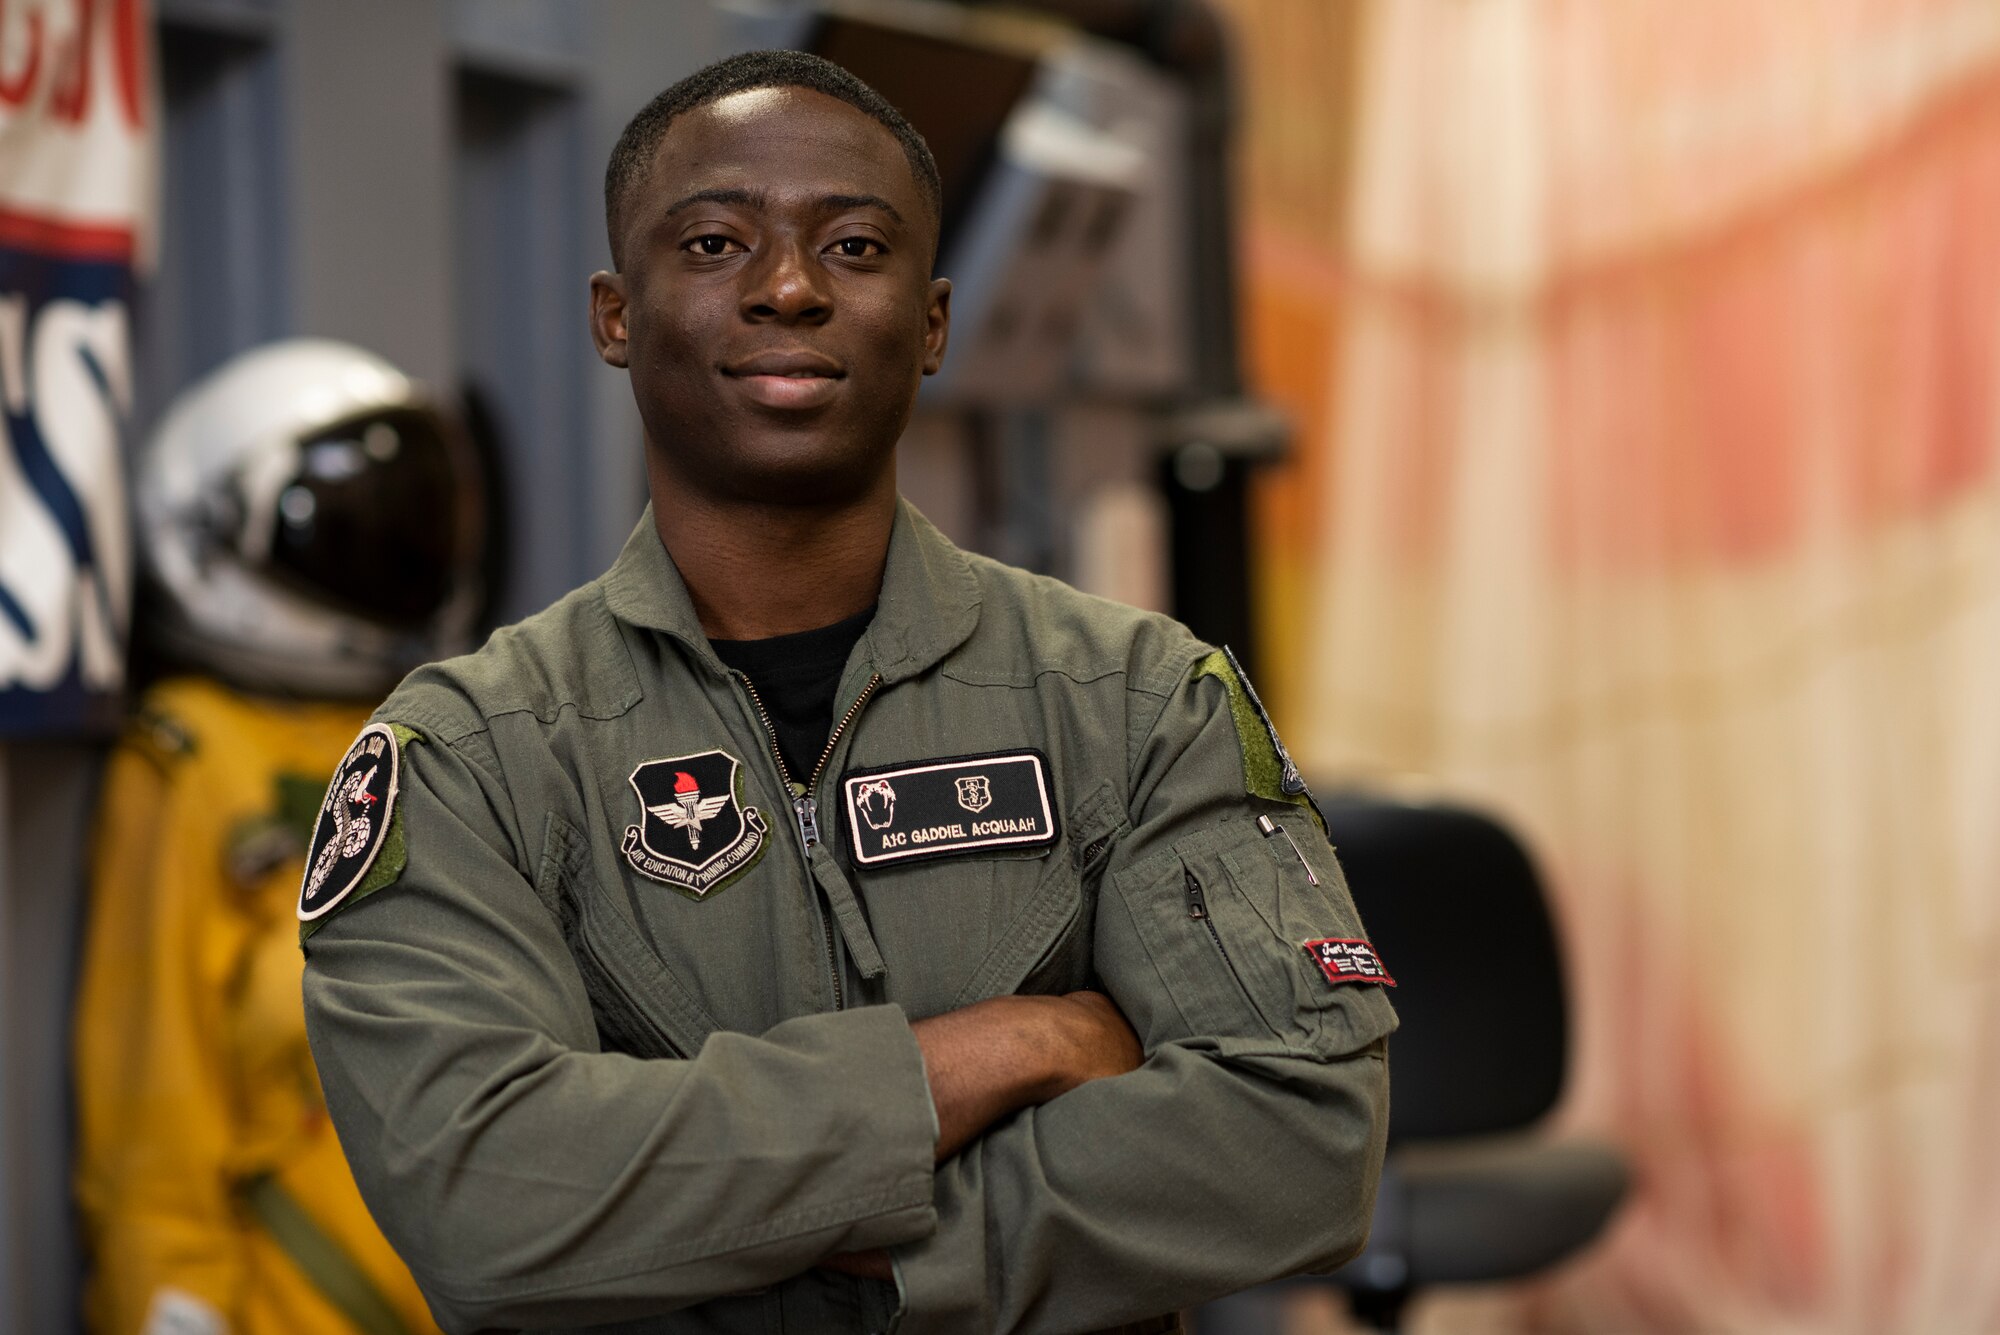 Airman 1st Class Gaddiel Acquaah, a 47th Operations Support Squadron aerospace physiology technician, poses for a photo at Laughlin Air Force Base, Texas, Oct. 2, 2020. Acquaah plays an important role in Laughlin’s mission of training future combat aviators. He instructs pilots and aircrew members on how to expertly handle any in-flight emergencies and teaches them the physiological effects flying has on their bodies. (U.S. Air Force photo by Senior Airman Marco A. Gomez)